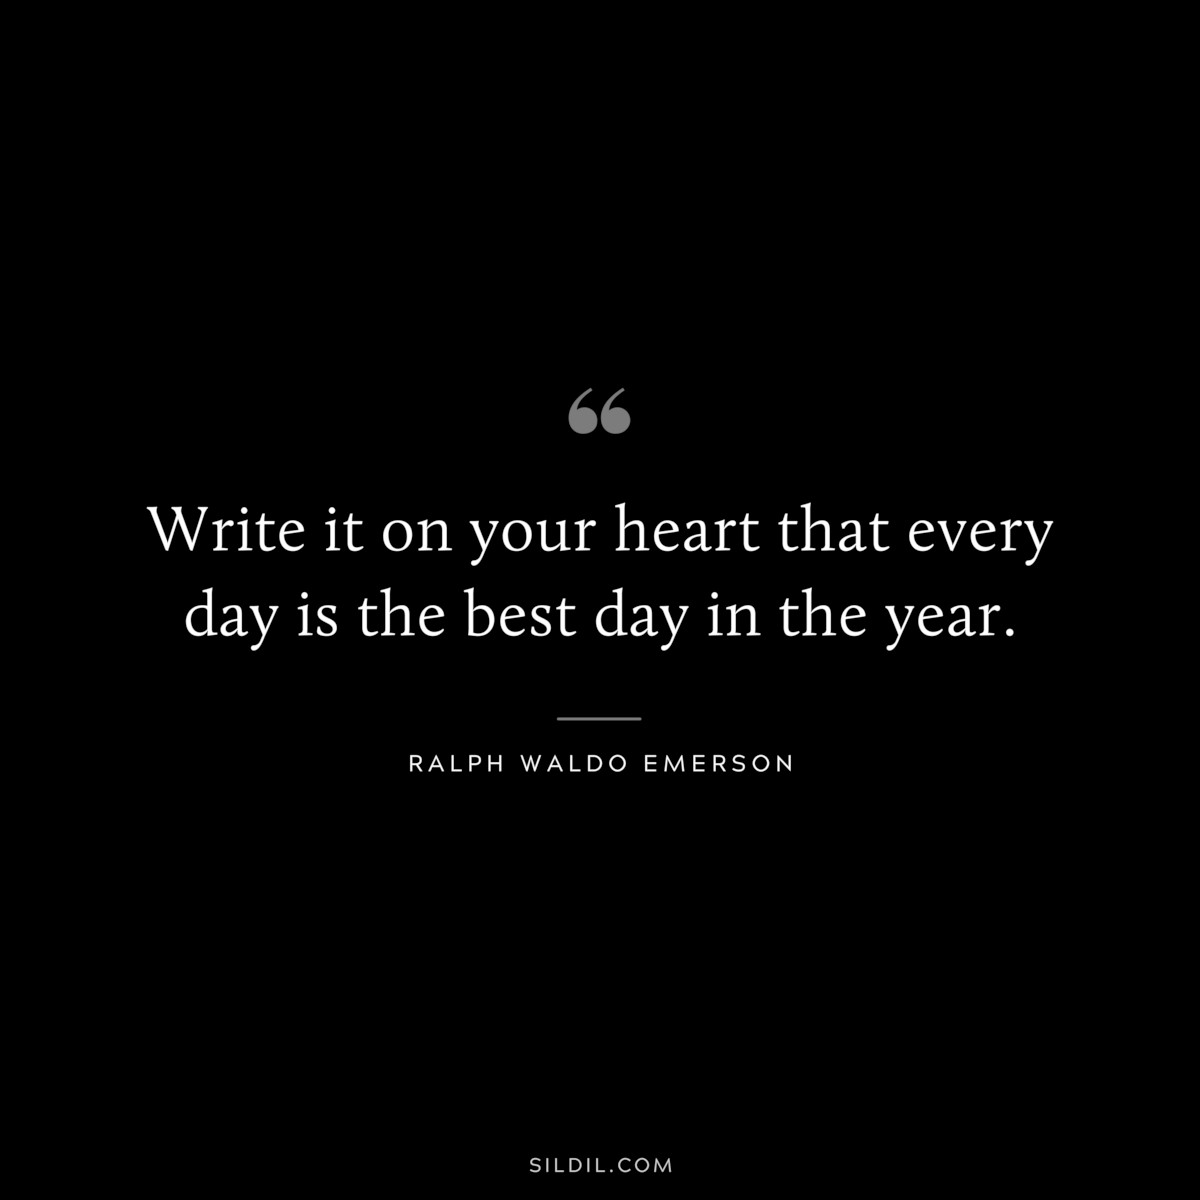 Write it on your heart that every day is the best day in the year. — Ralph Waldo Emerson